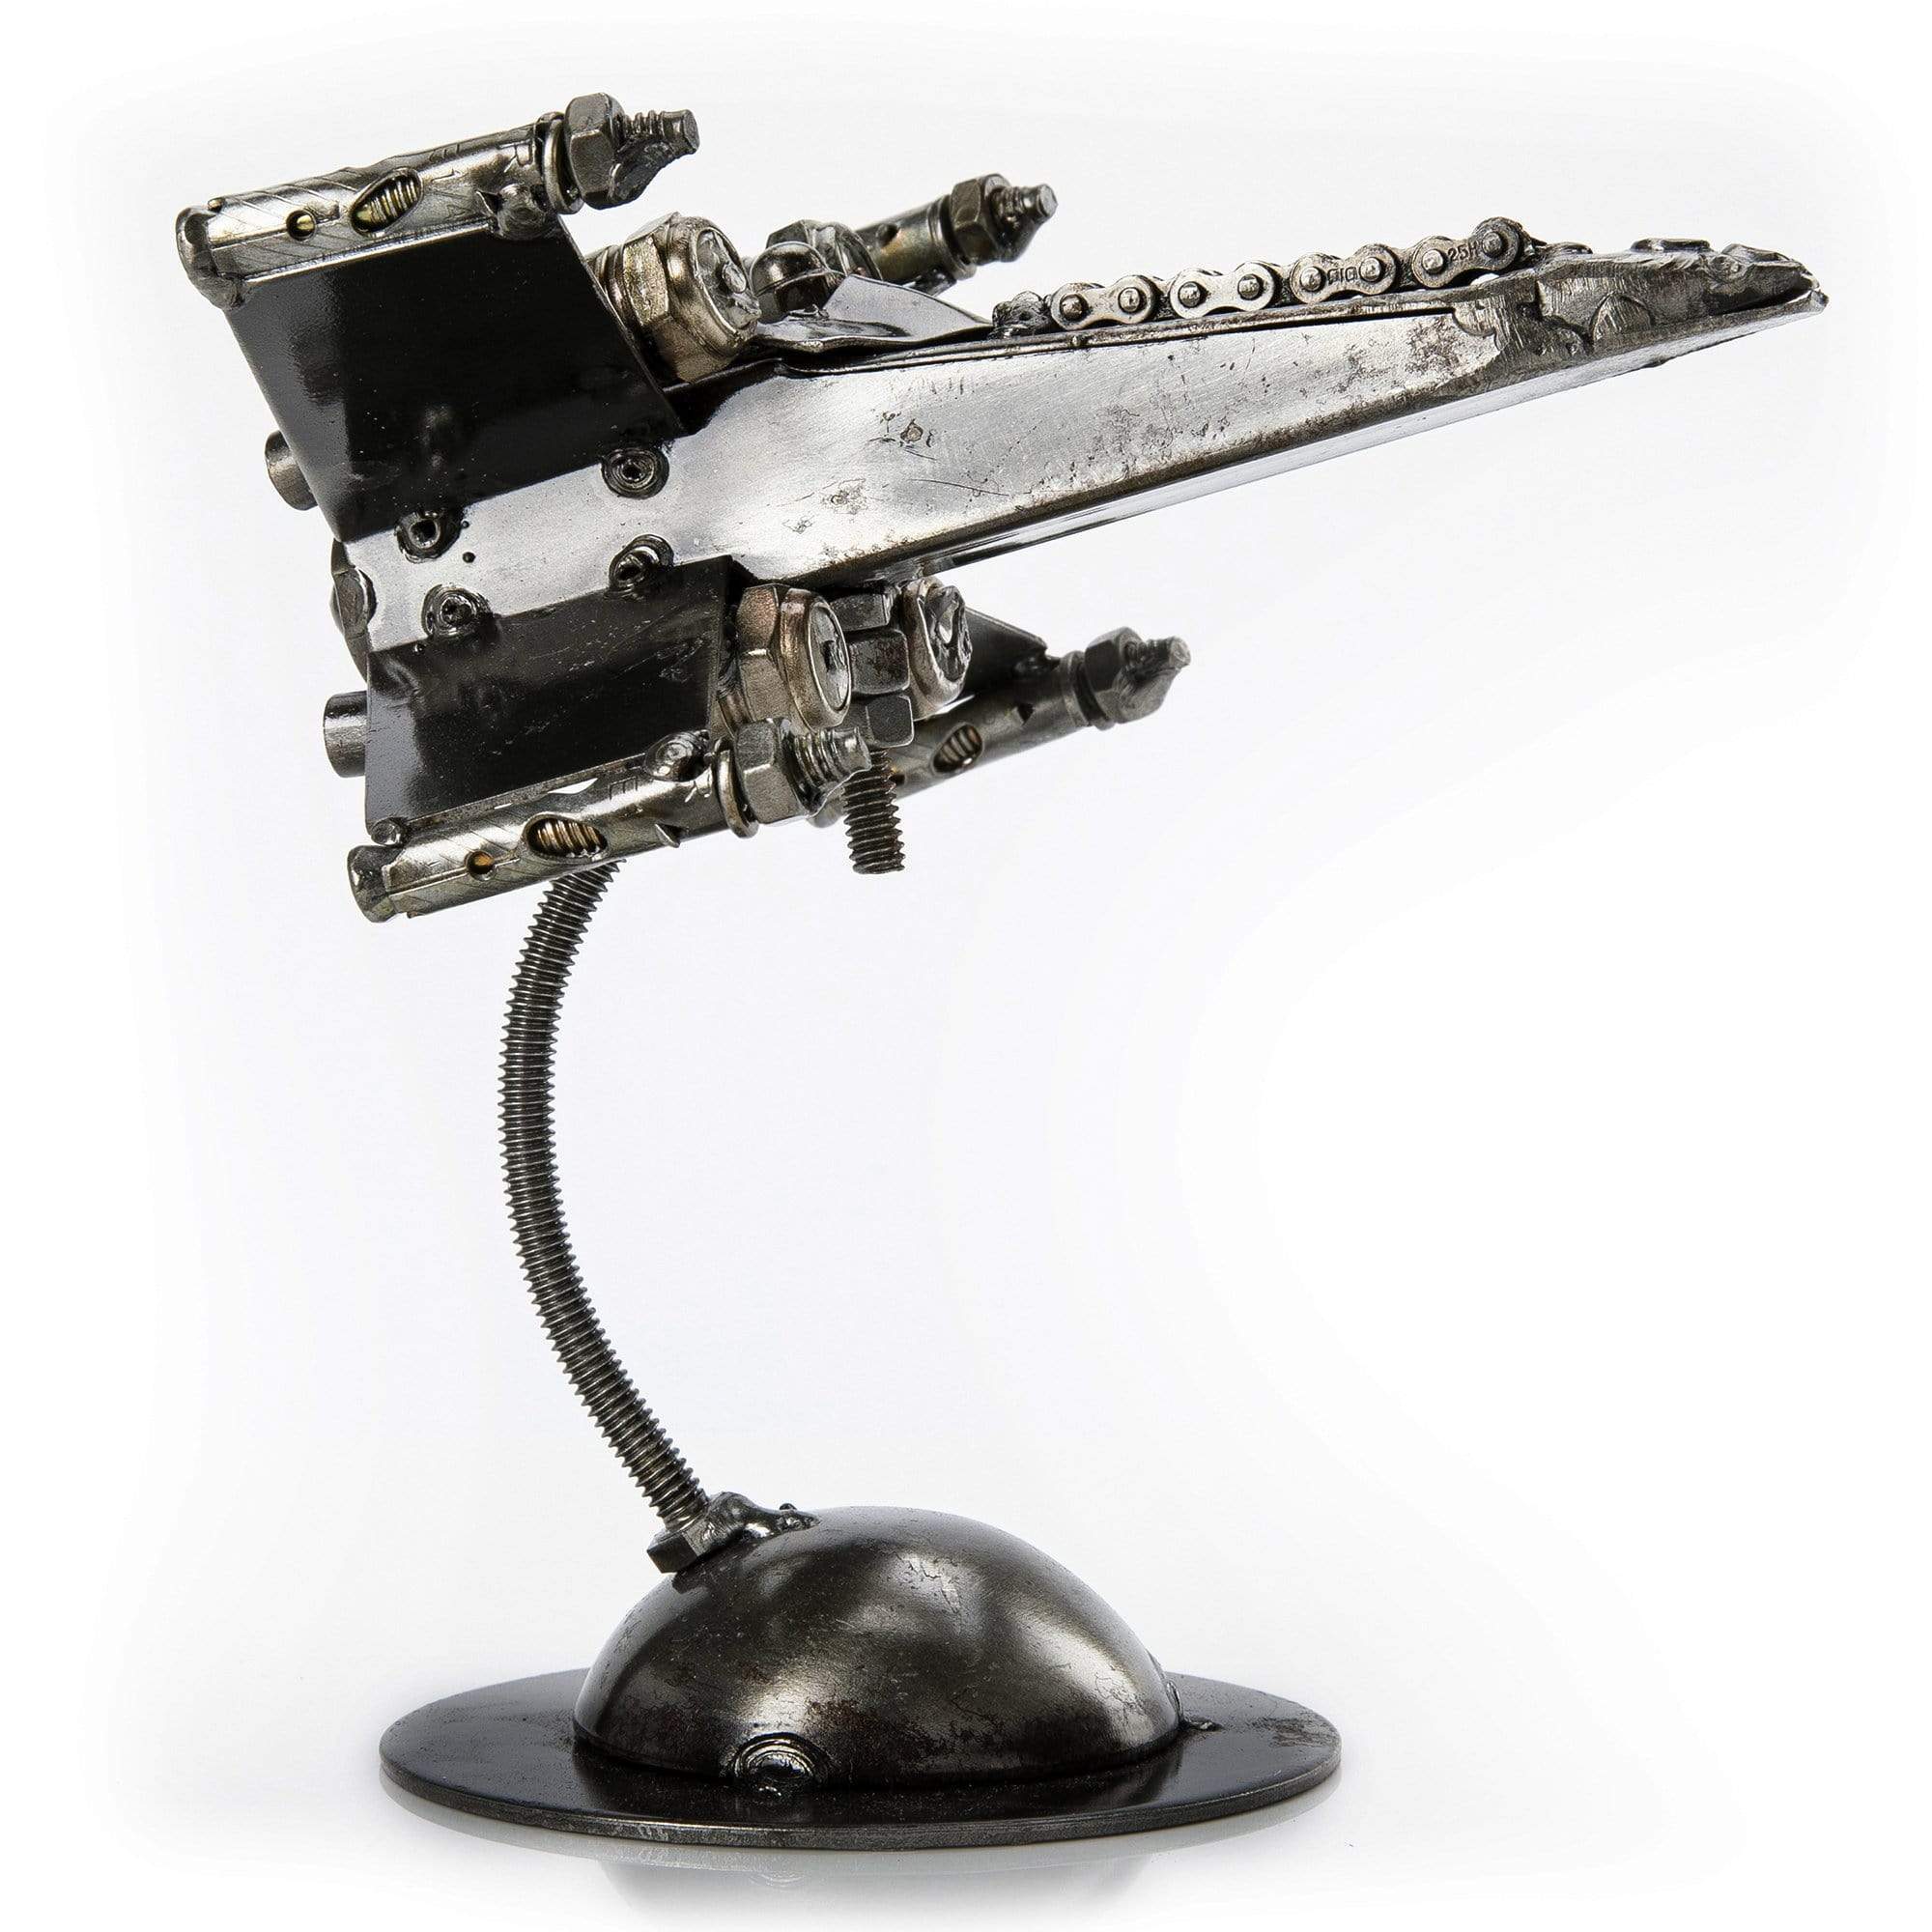 Kalifano Recycled Metal Art X-Wing Inspired Recycled Metal Sculpture RMS-400XW-N